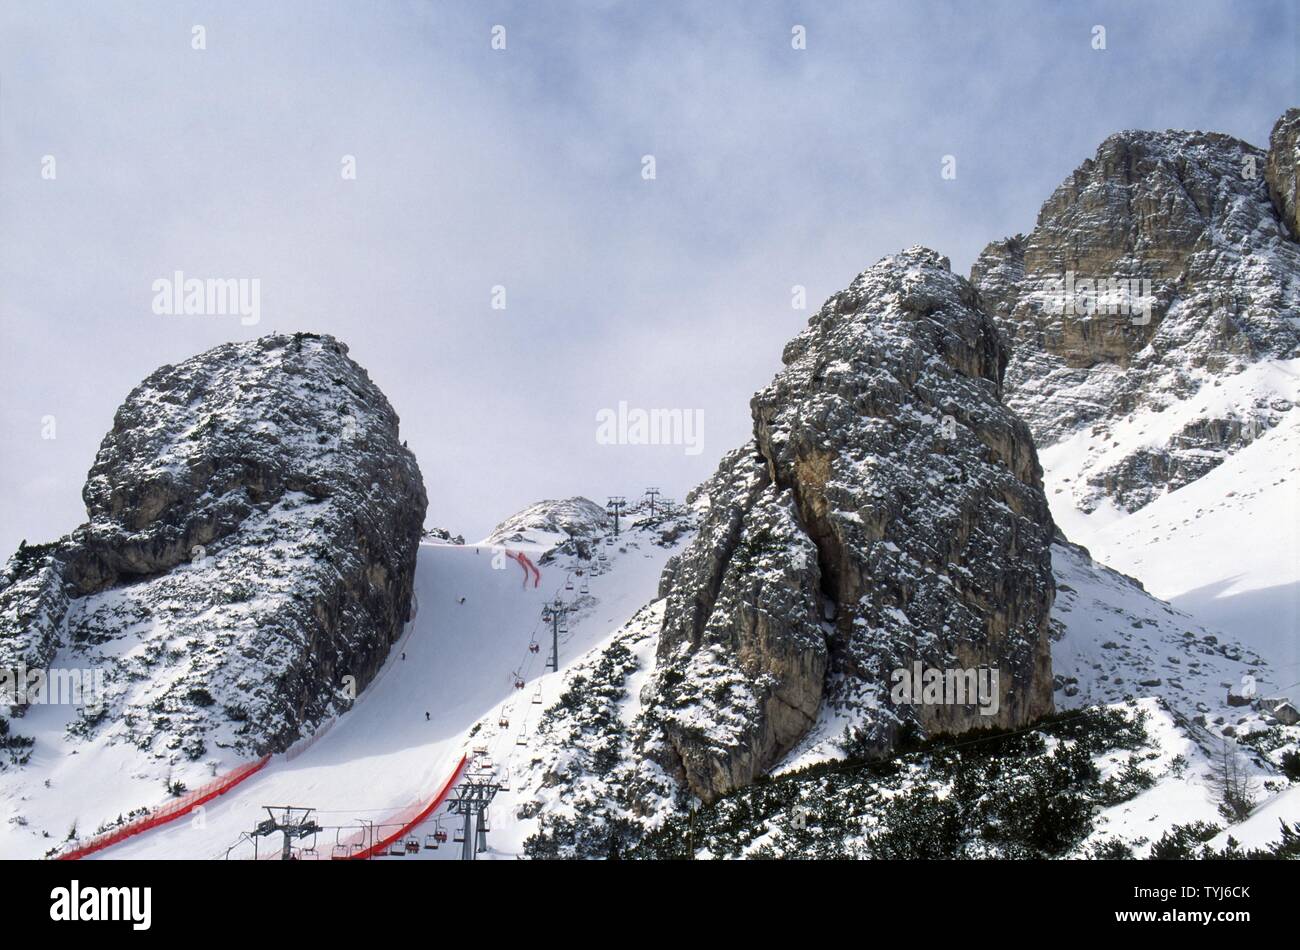 Cortina d'Ampezzo (Italy), the ski run called 'Olympia delle Tofane', which will host the women's alpine skiing competitions during the 2026 Winter Olympics Stock Photo